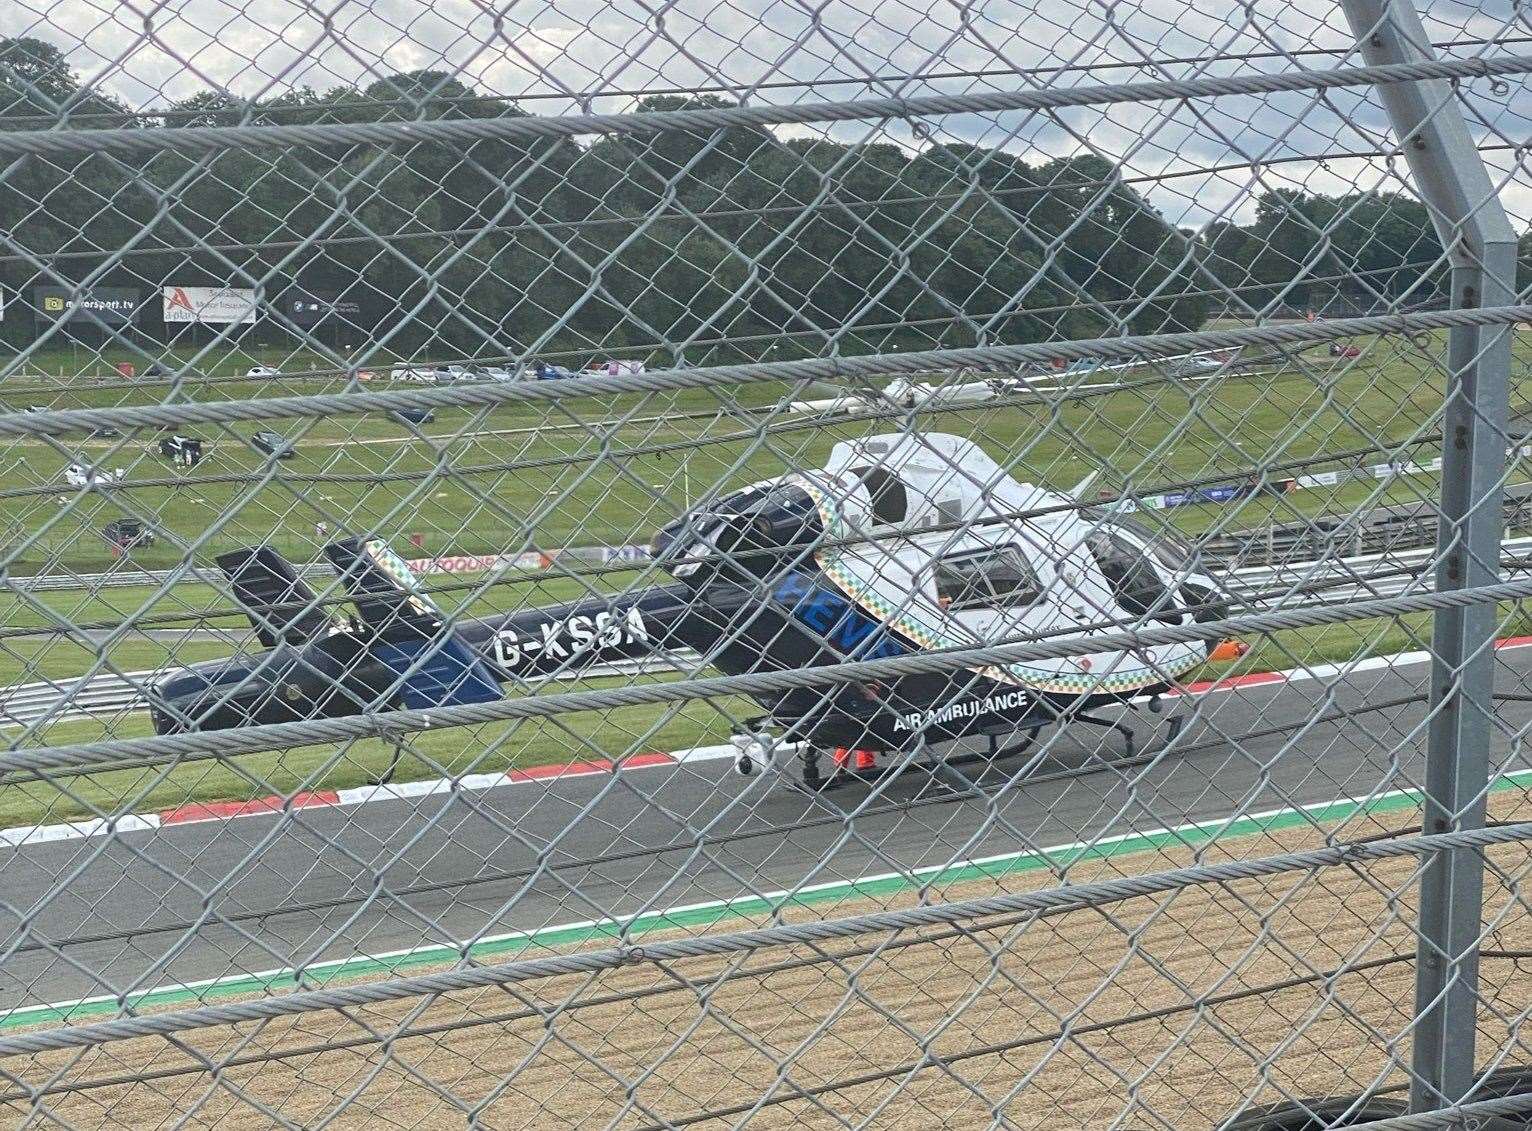 The air ambulance at the scene of the crash at Brands Hatch. Picture: @FlooringKimpton/Twitter